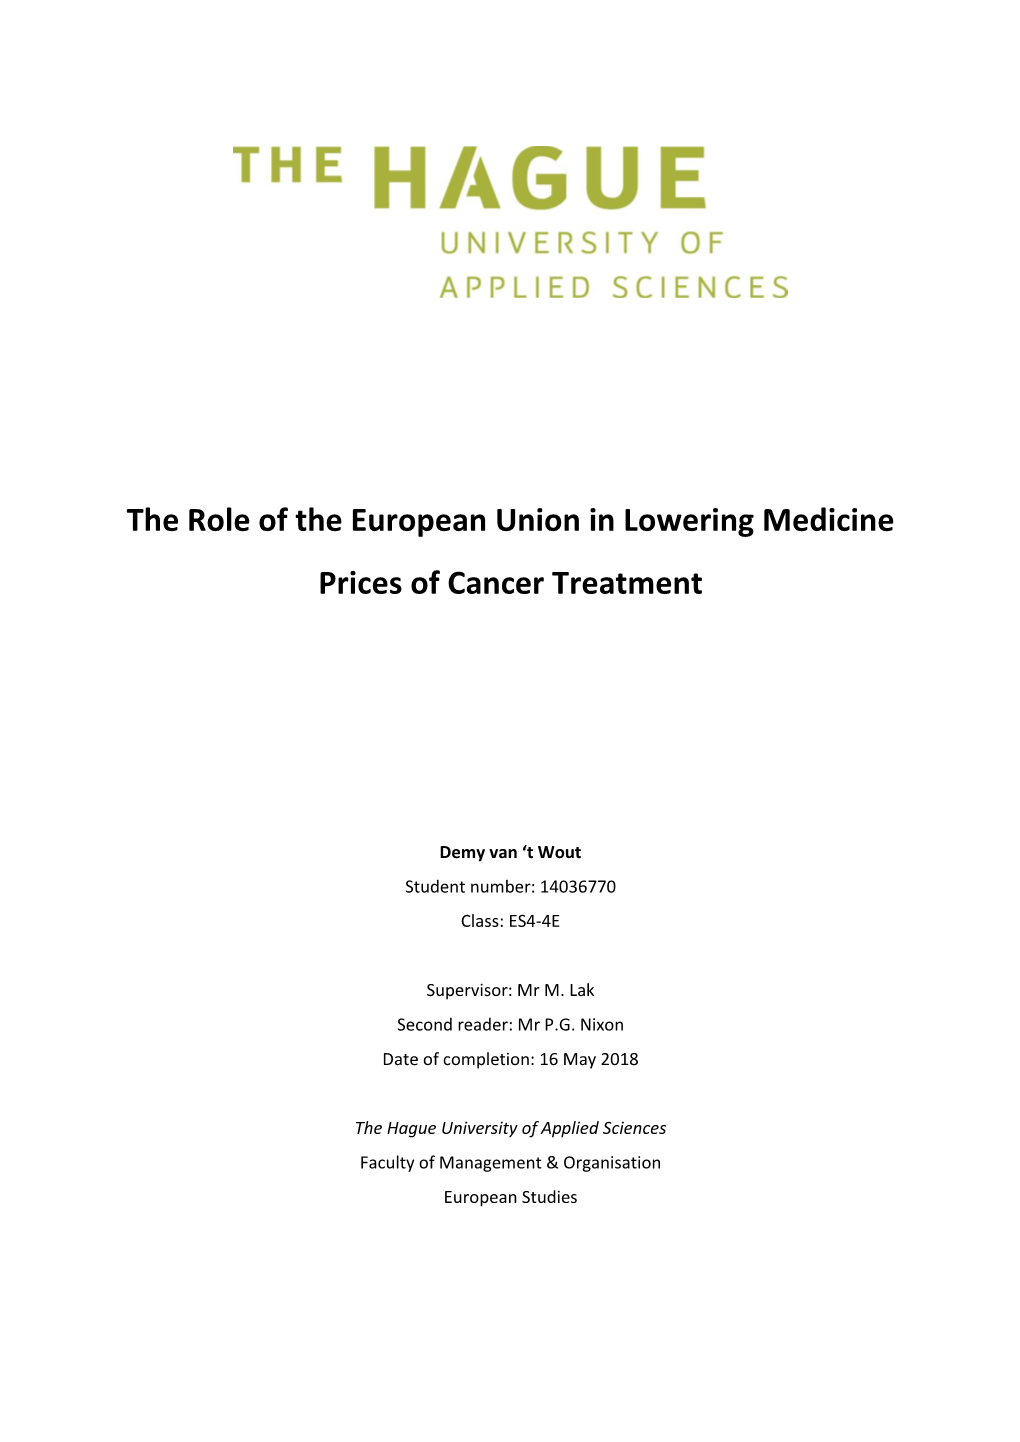 The Role of the European Union in Lowering Medicine Prices of Cancer Treatment